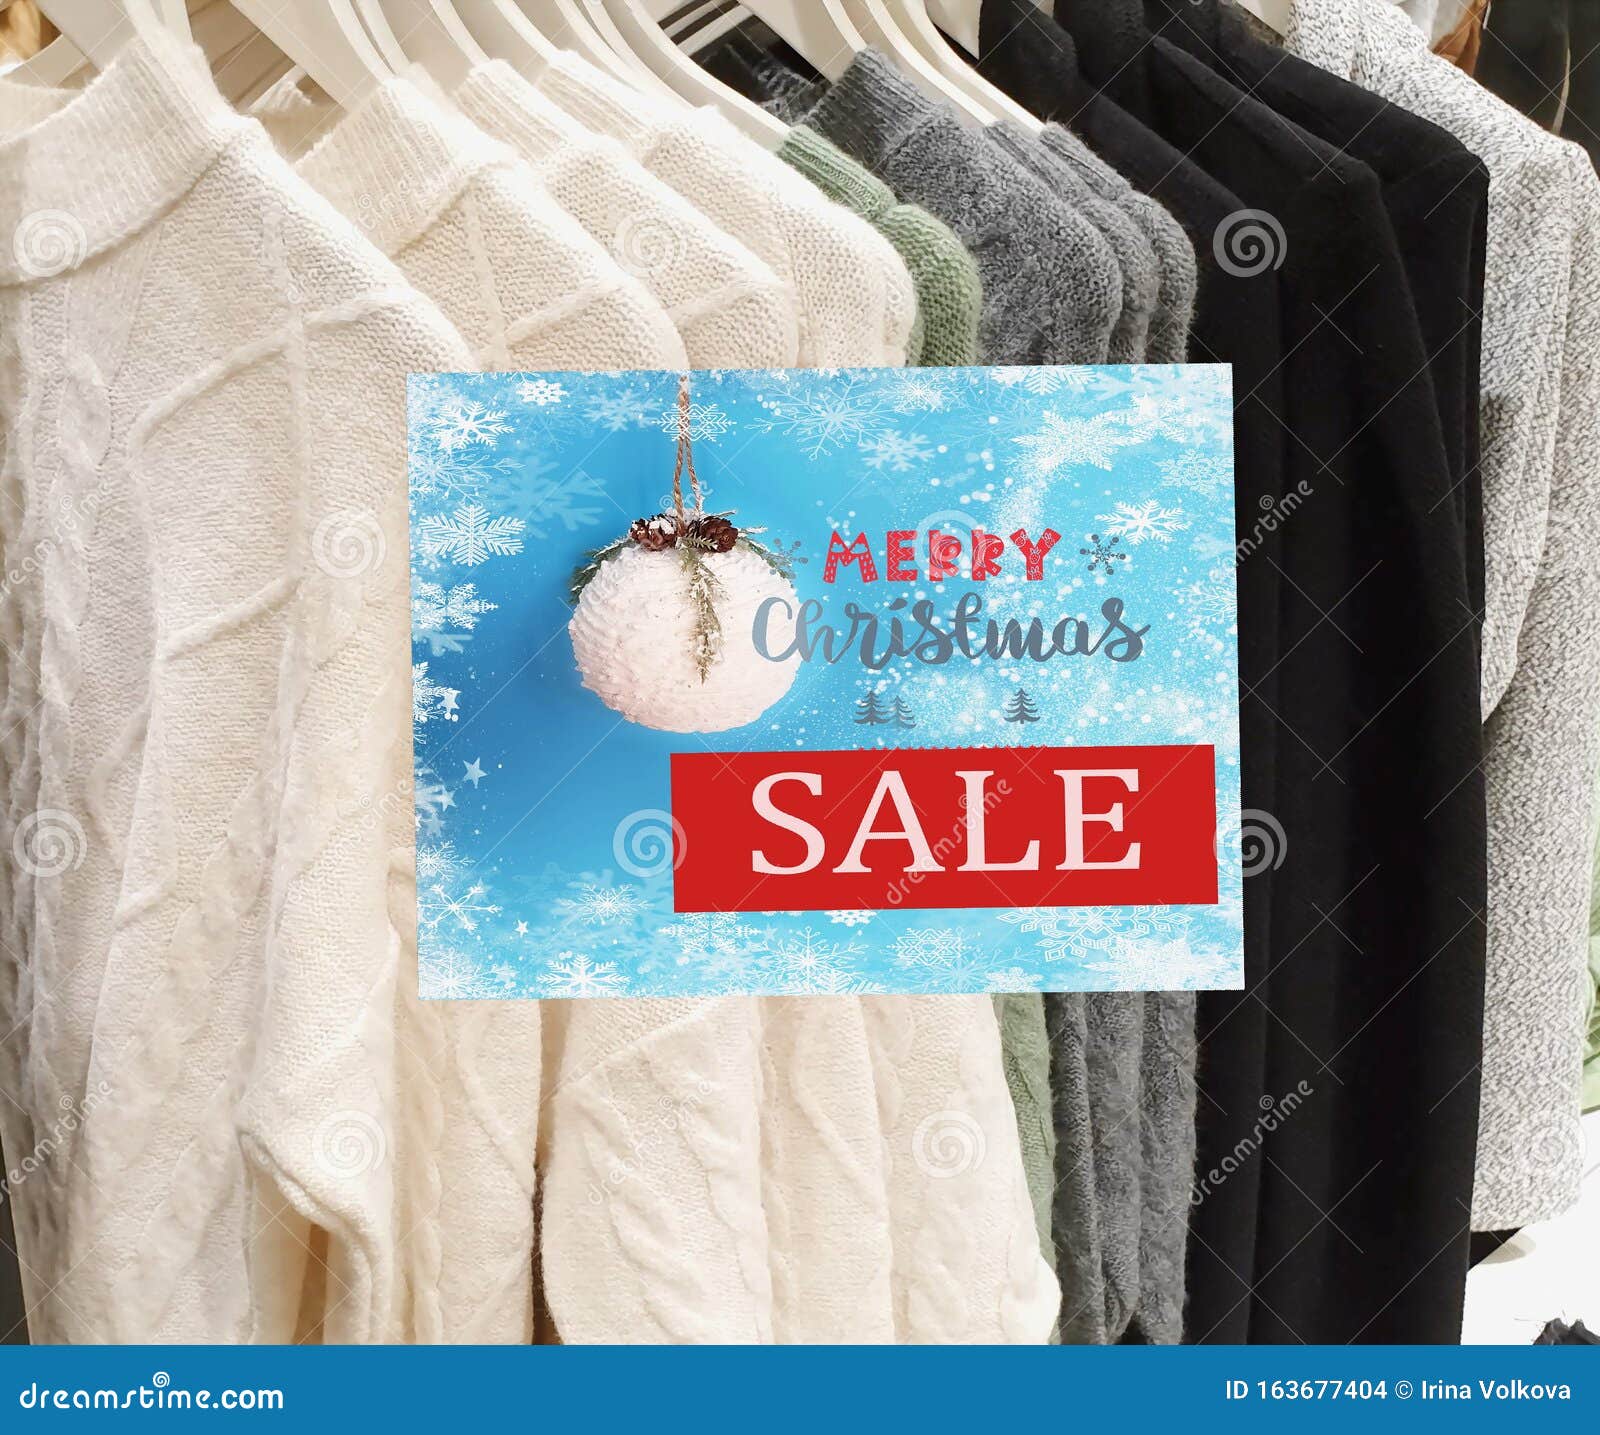 https://thumbs.dreamstime.com/z/christmas-season-big-sale-banner-women-clothes-winter-fashion-collection-discount-clothing-shopping-center-clearance-clothing-163677404.jpg